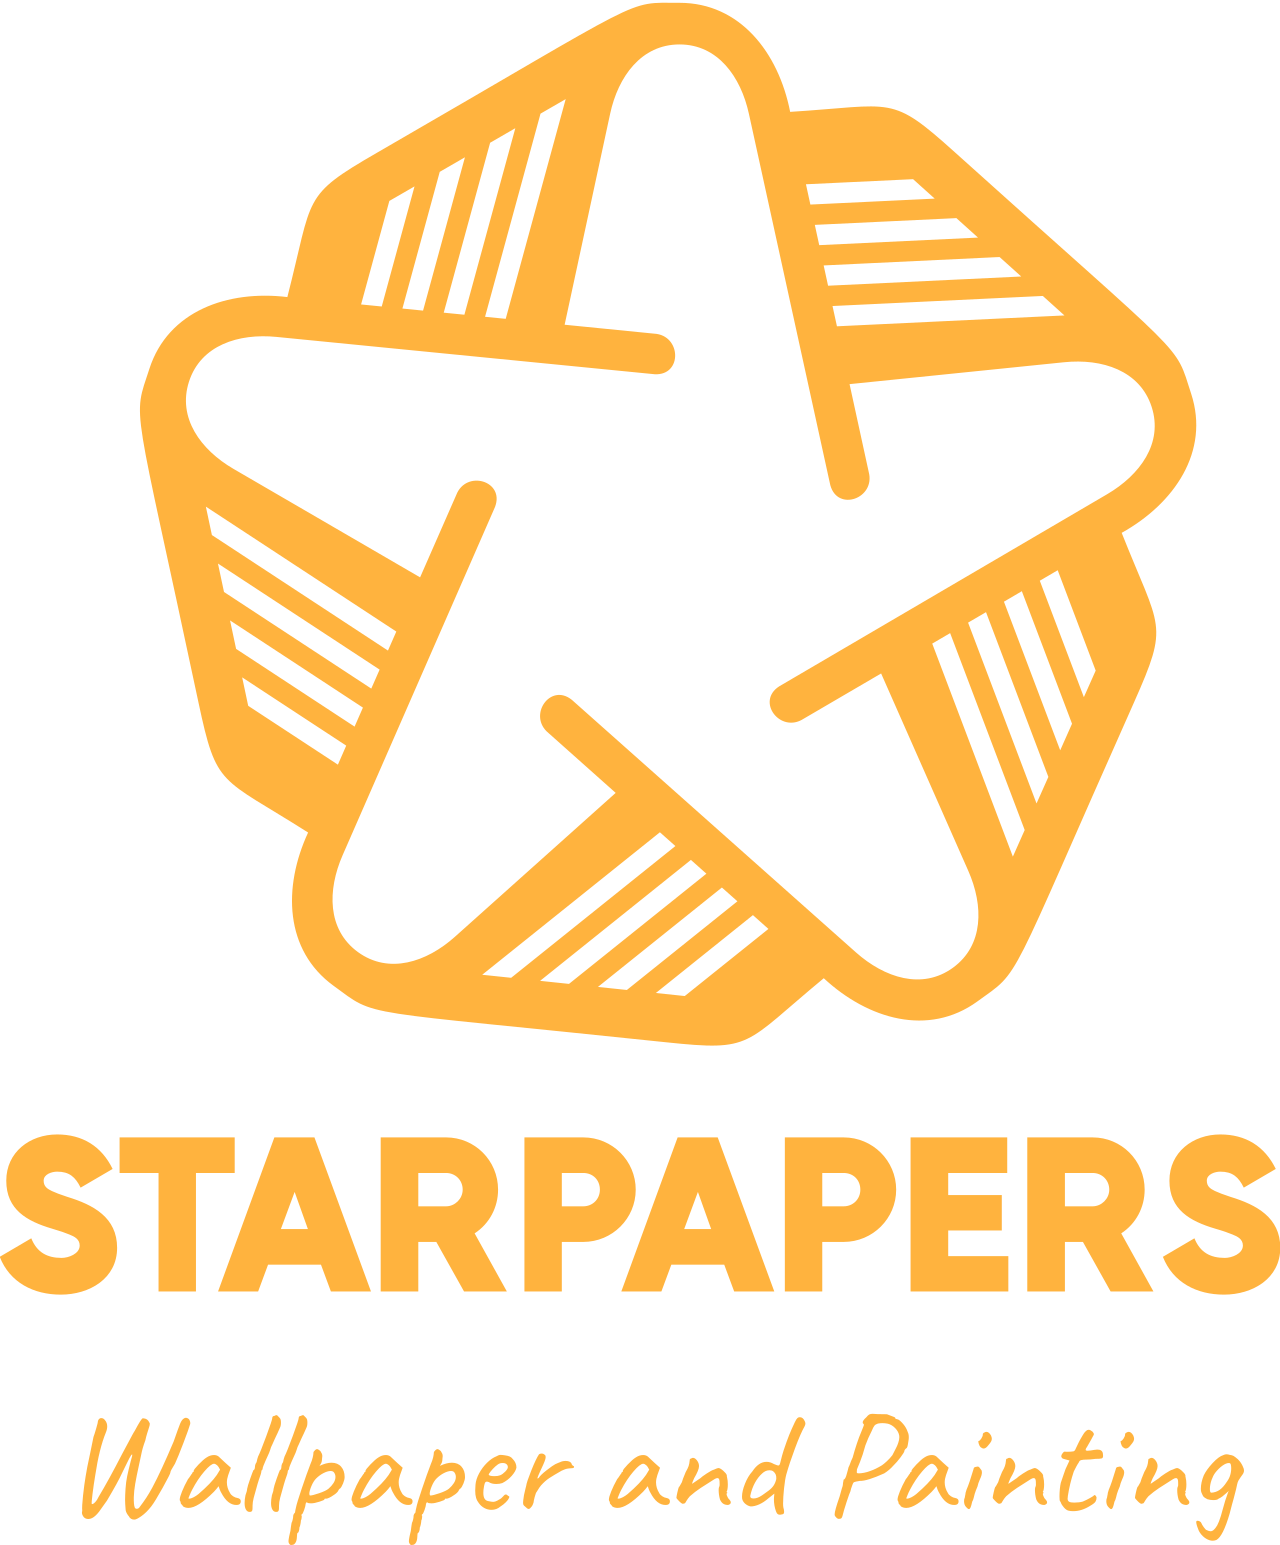 StarPapers 's logo